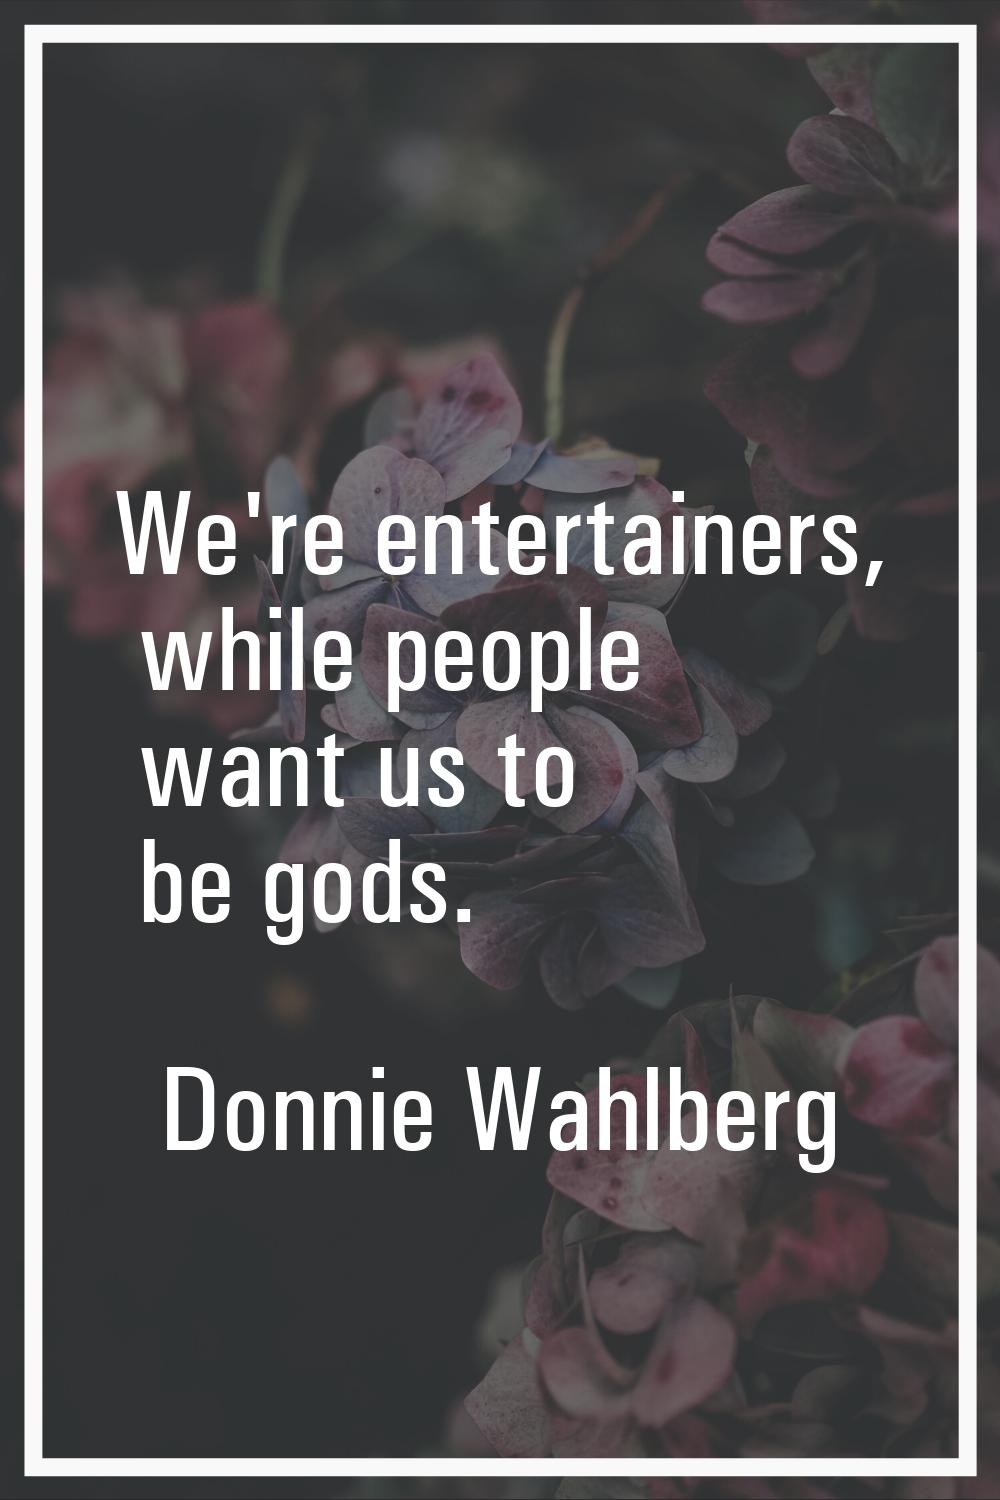 We're entertainers, while people want us to be gods.